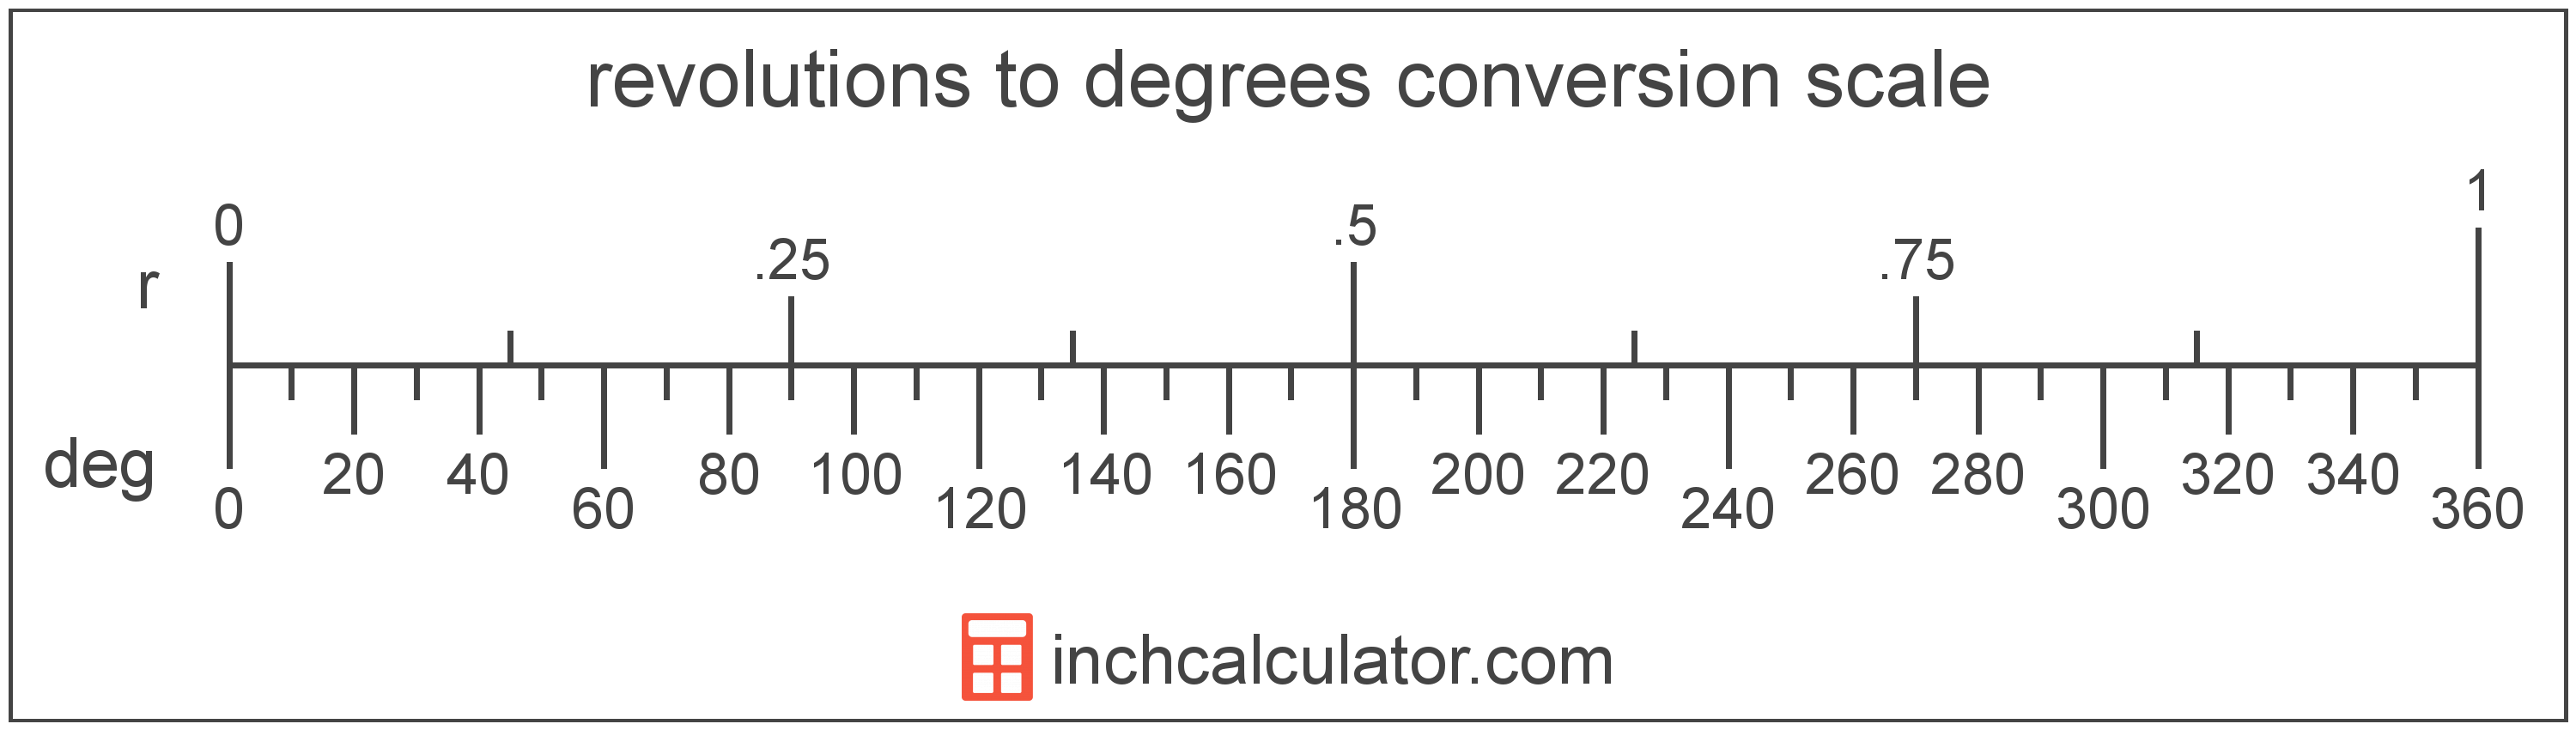 conversion scale showing degrees and equivalent revolutions angle values